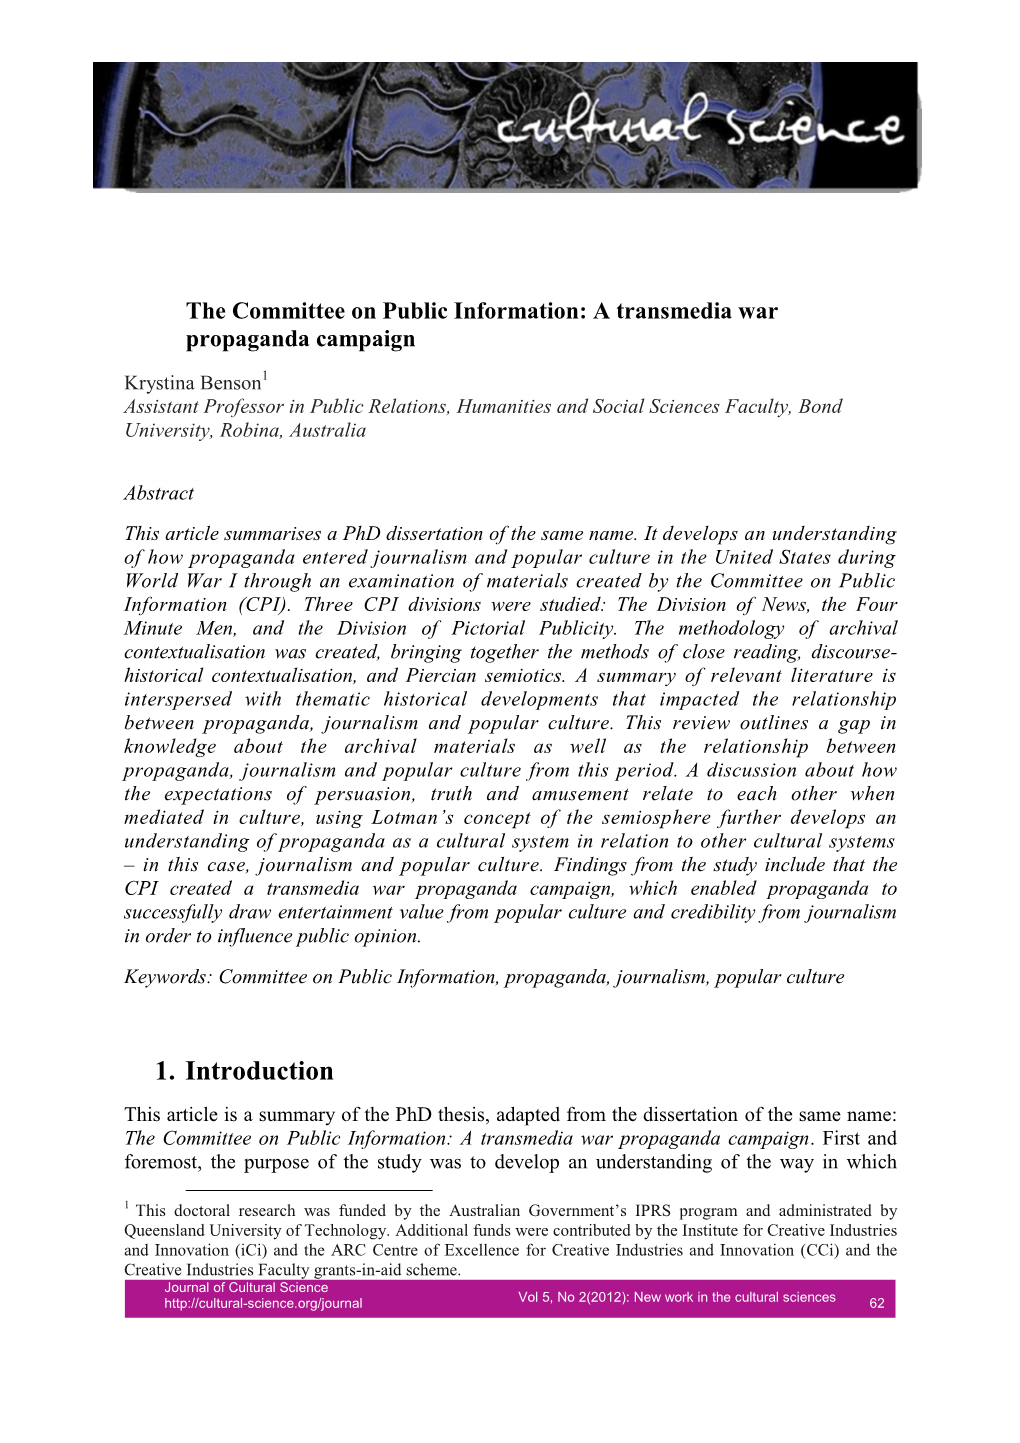 The Committee on Public Information: a Transmedia War Propaganda Campaign